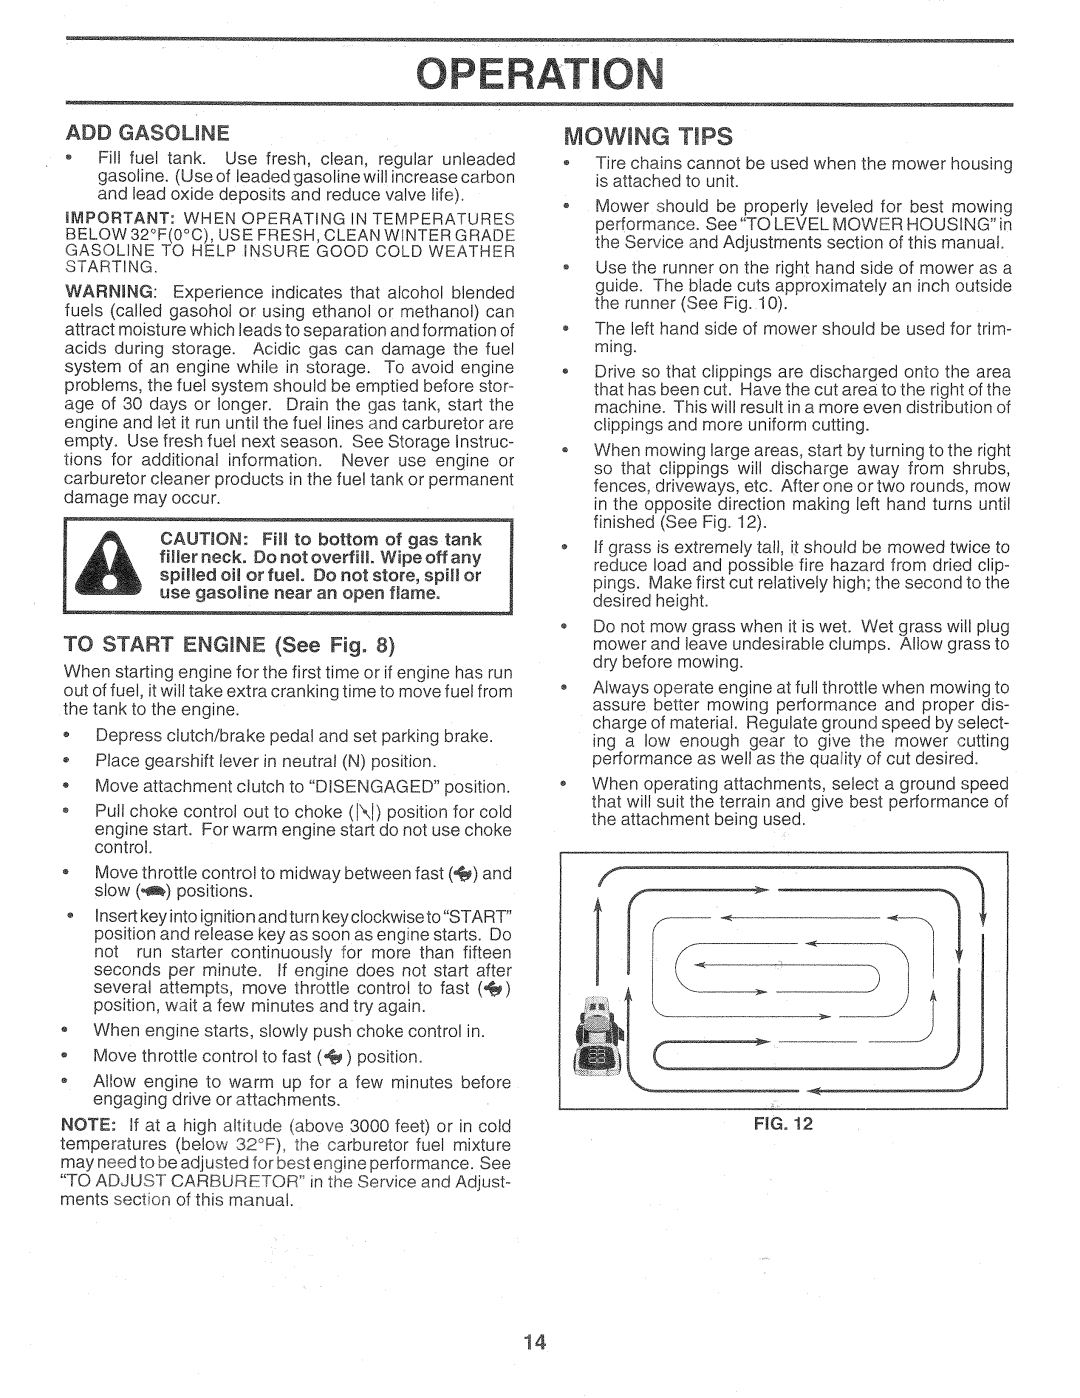 Sears 917.257720 owner manual OPERATmON, Mowing Tips, Add Gasoune, TO START ENGINE See Fig 